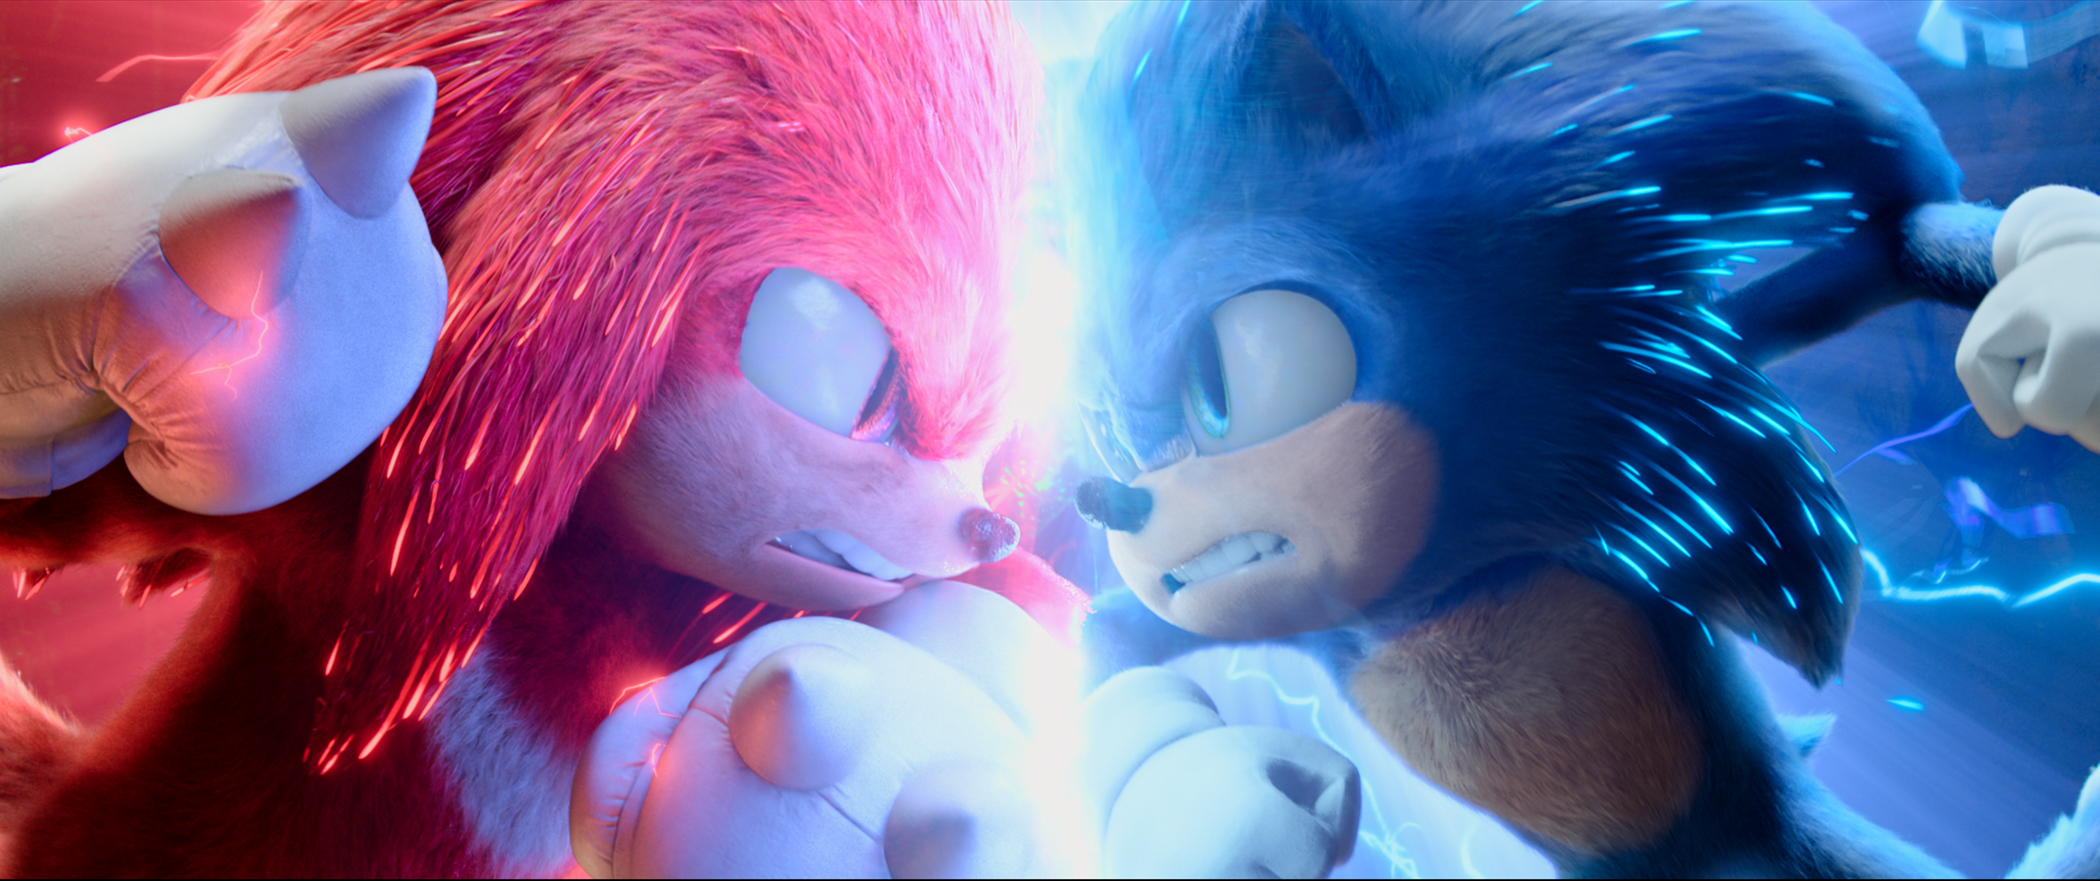 ‘Sonic the Hedgehog 2’ goes boldly where so many blockbusters have gone before